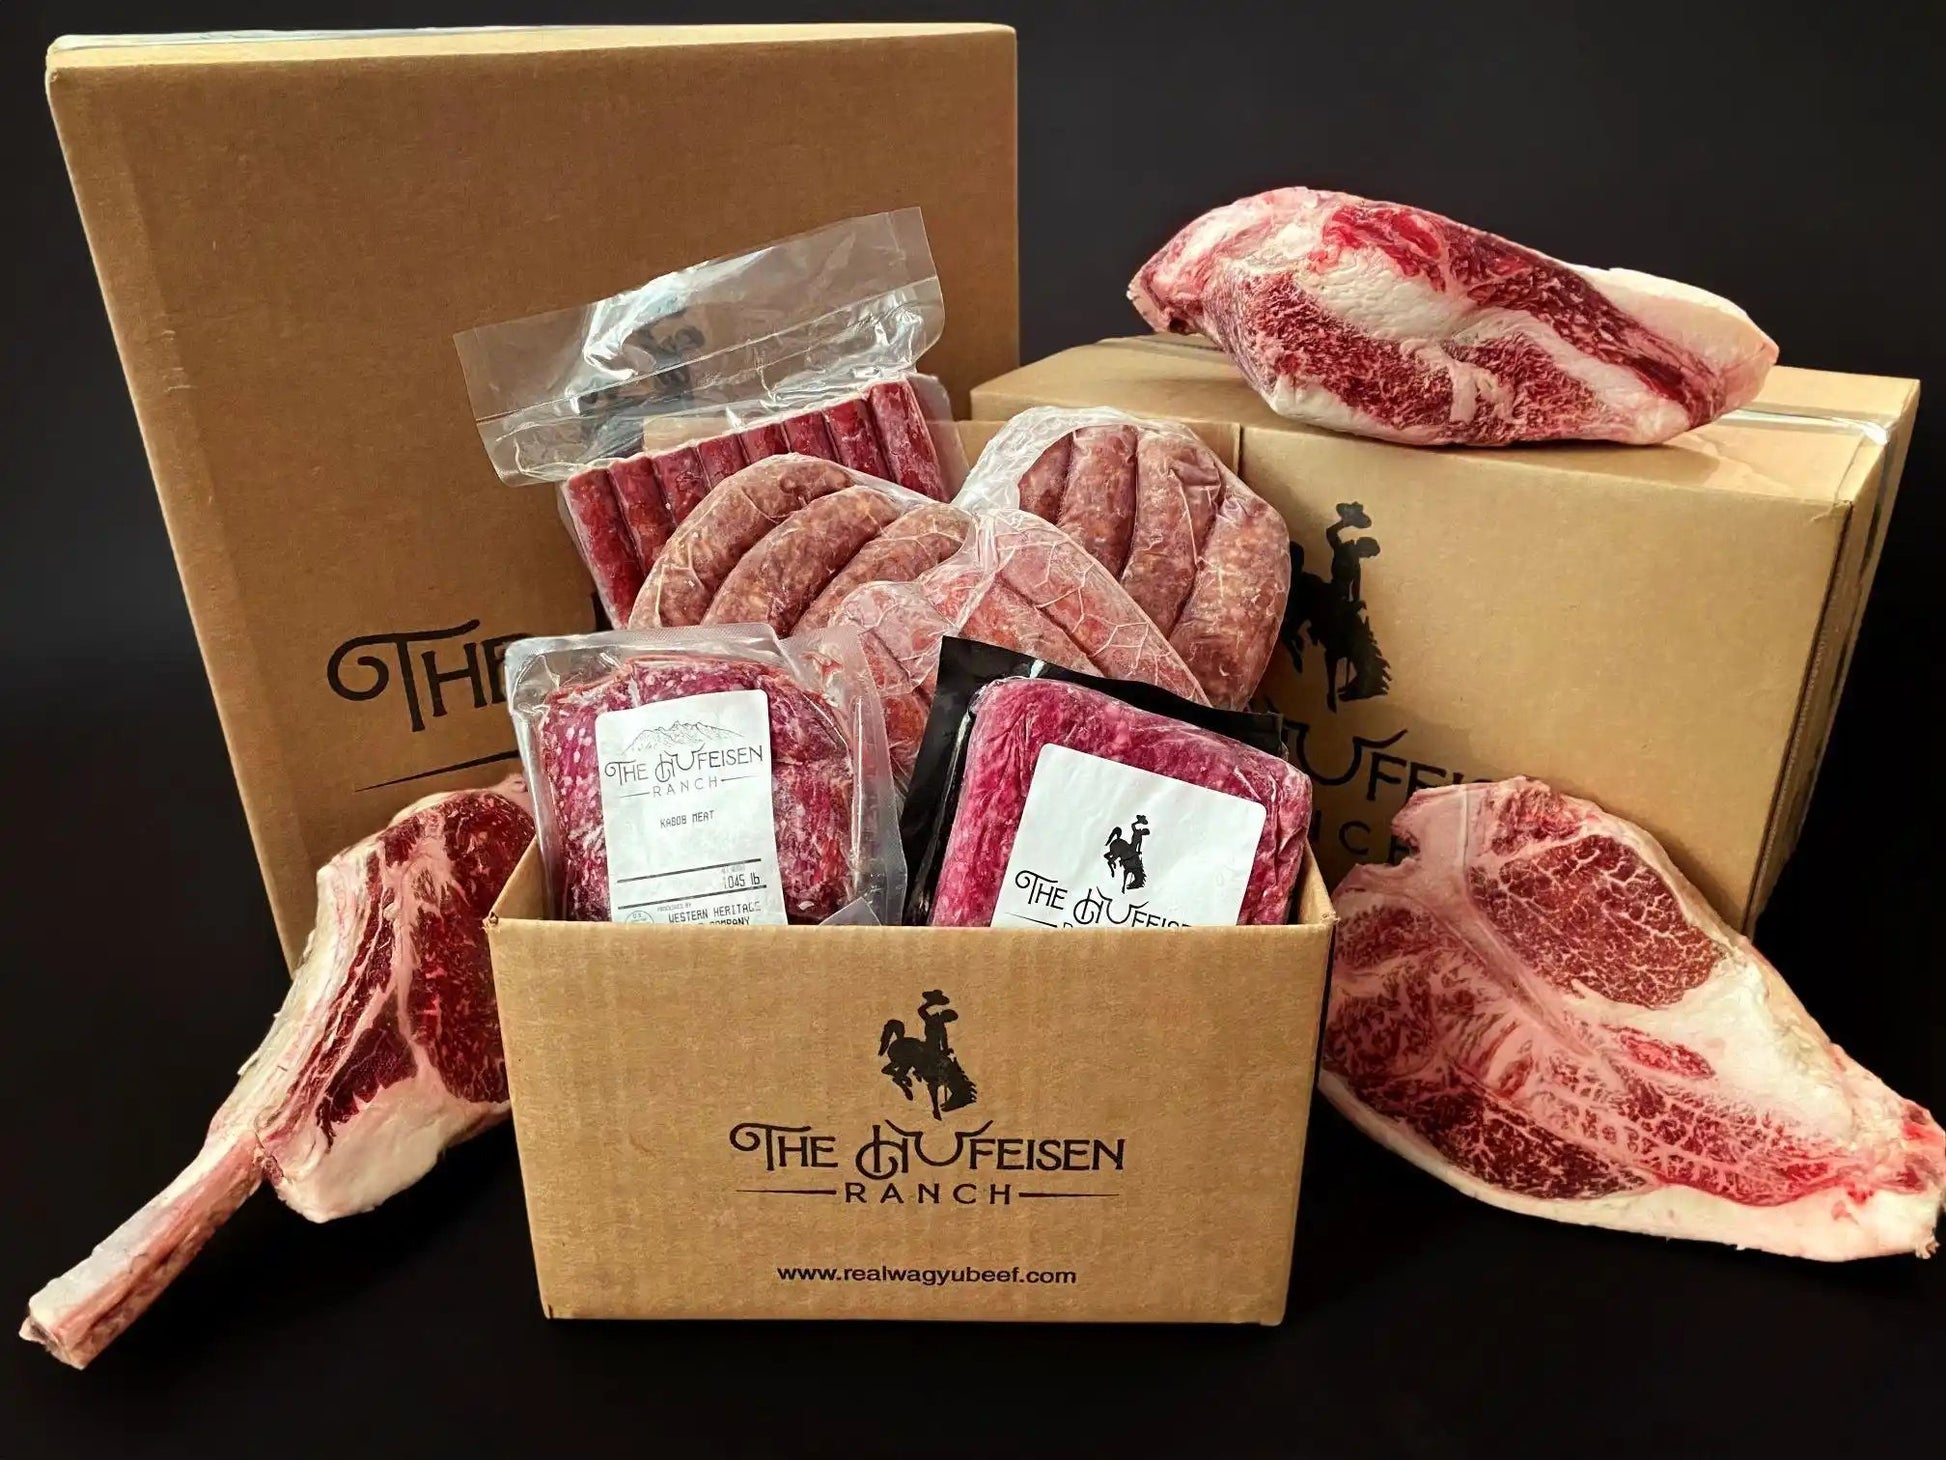 100% All-Natural Grass-Fed Pasture-Raised Wagyu Carnivore Man Gift BoxThe Carnivore Man Gift Box is the perfect package for the meat-loving individual in your life. It features a delicious assortment of high-quality beef products that 100%The Hufeisen-Ranch (WYO Wagyu)